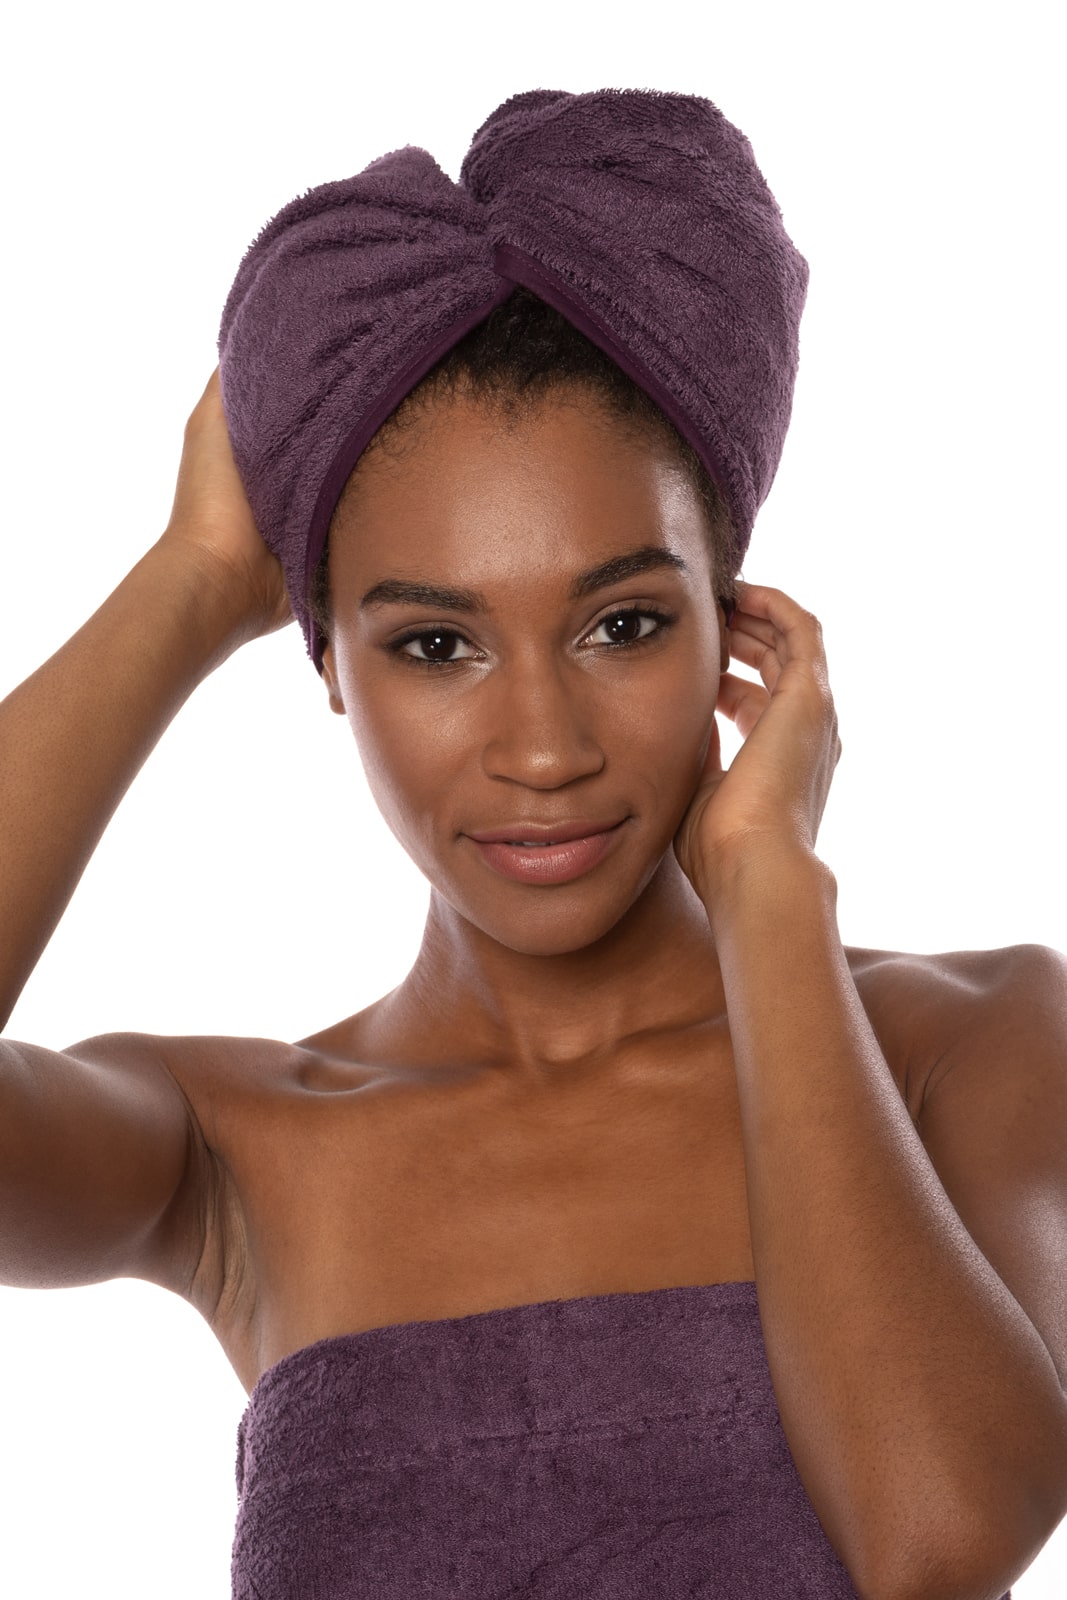 Fishers Finery Women's Terry Headwrap; Microfiber Hair Towel, Terry from Bamboo